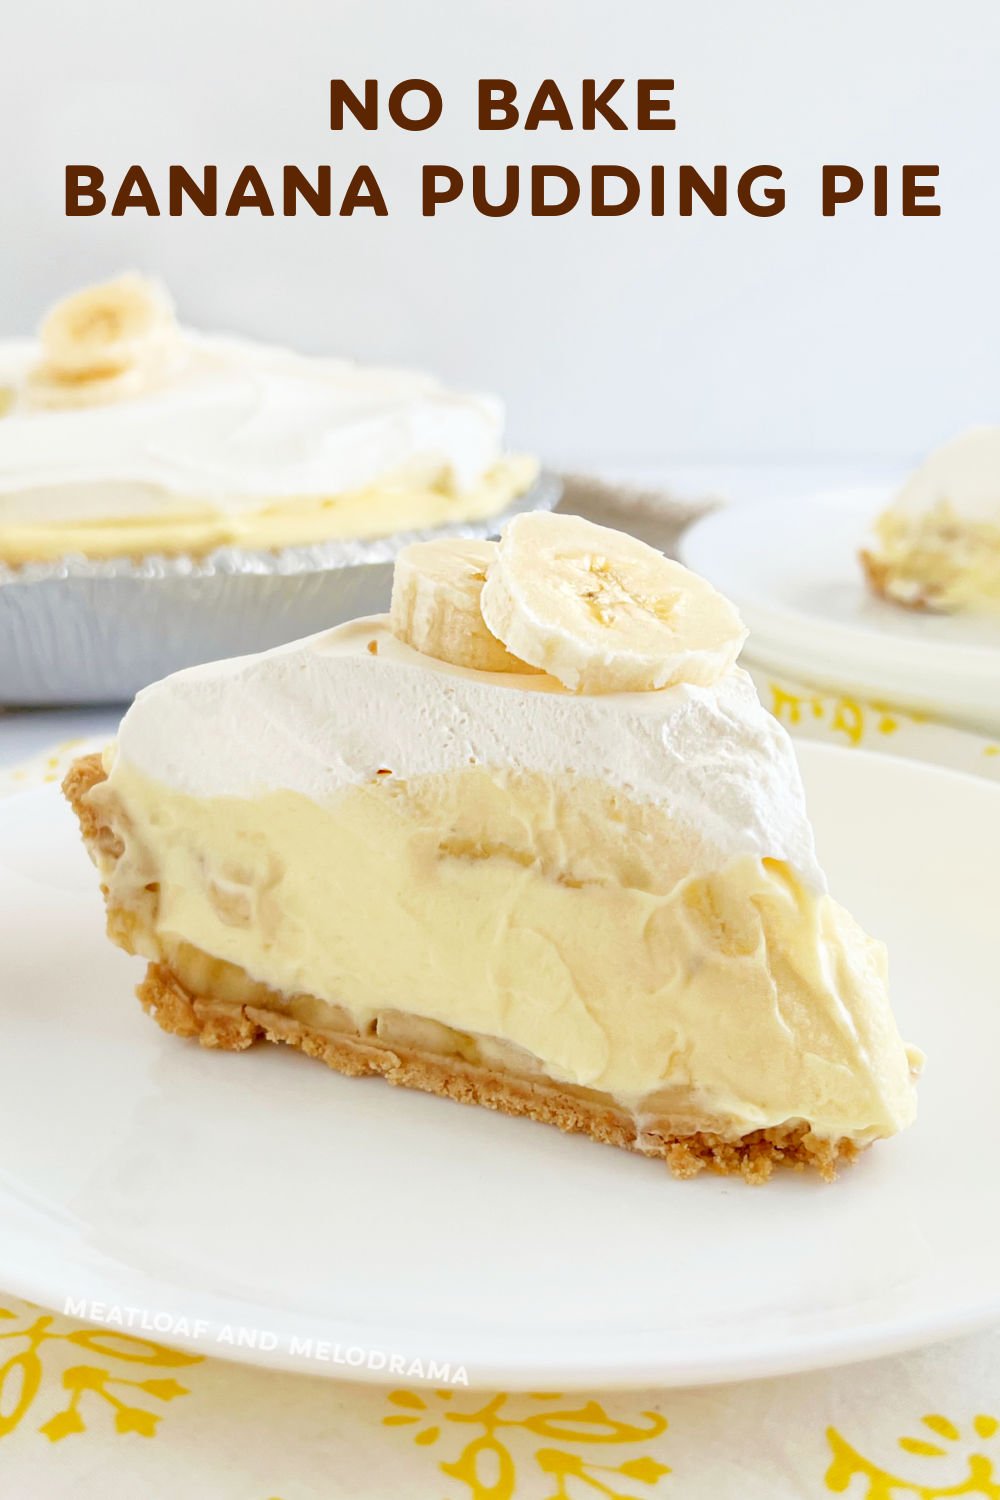 This No Bake Banana Pudding Pie in a graham cracker crust is an easy no bake dessert perfect for summer, holidays and family gatherings. An easy recipe with simple ingredients that everyone loves! via @meamel